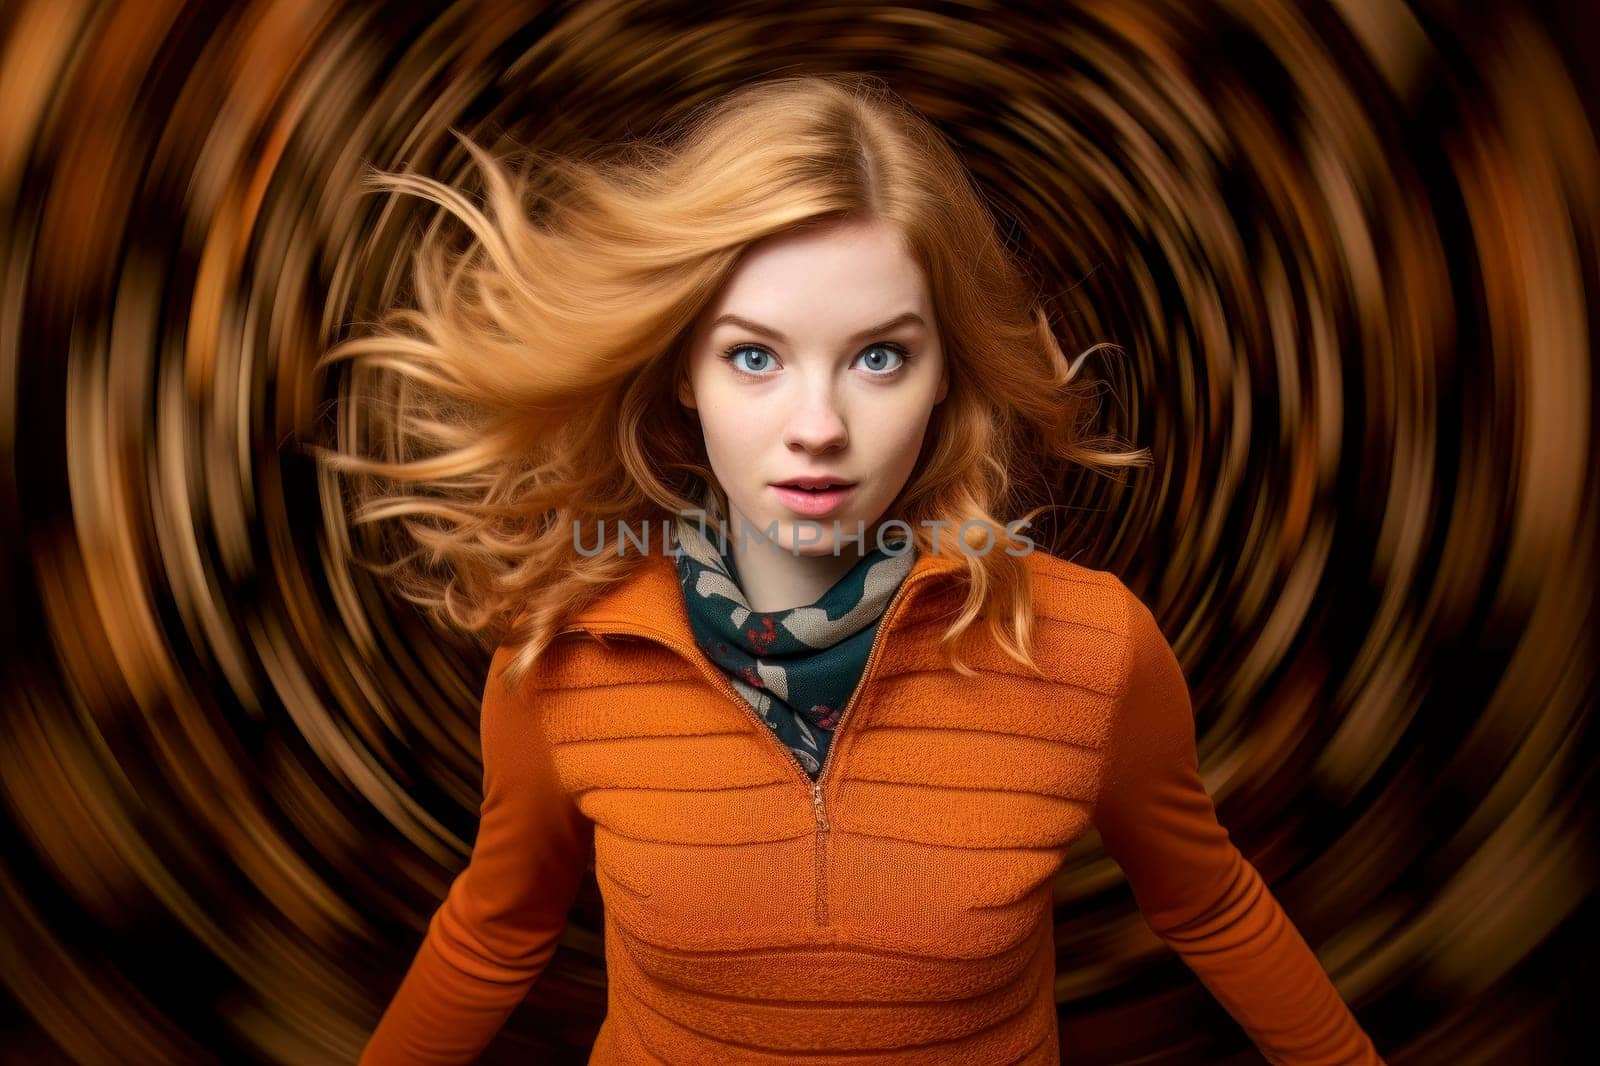 Creative Portrait of a Blonde Girl by pippocarlot